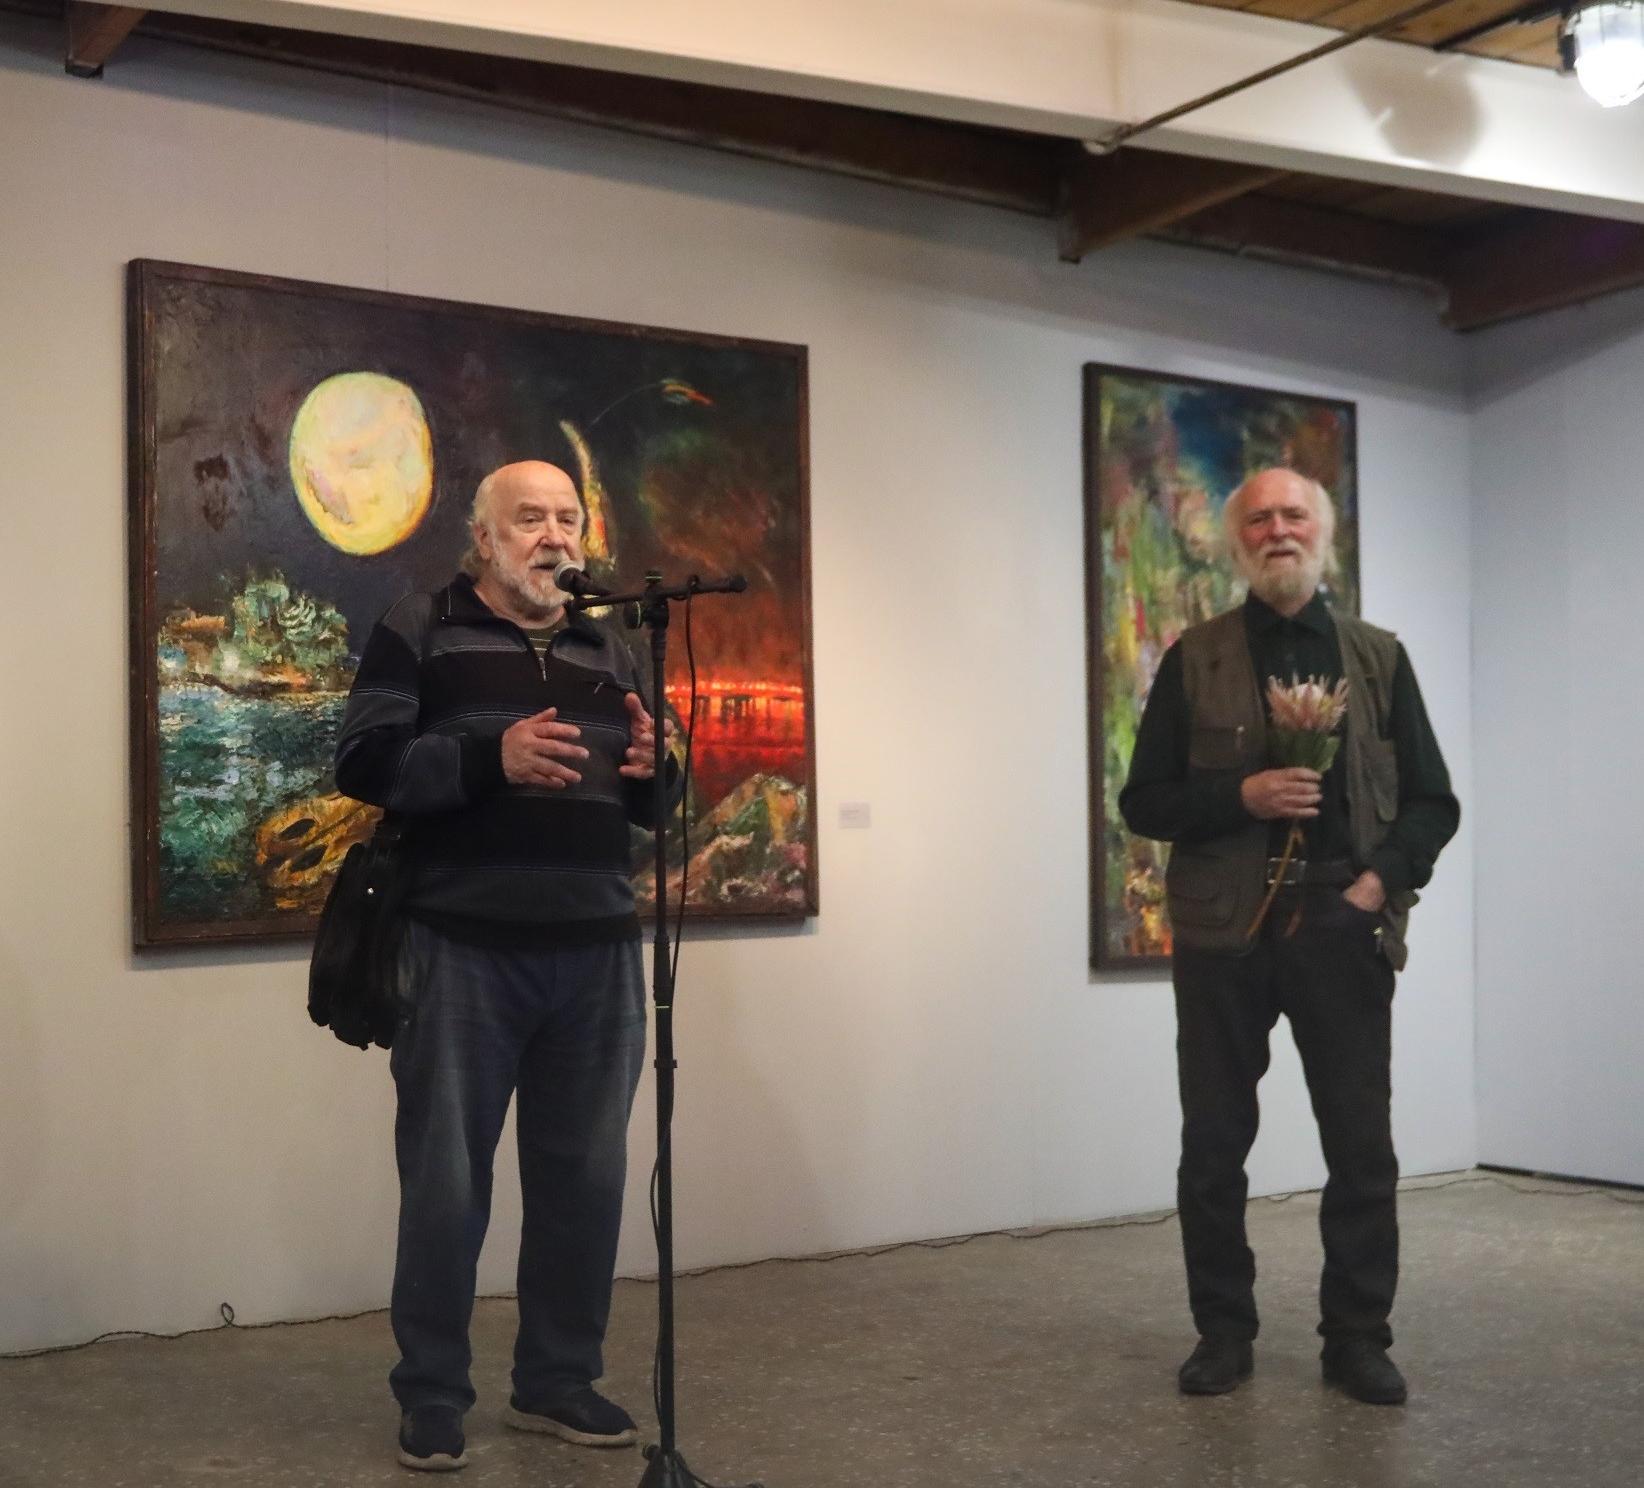 OPENING OF YEVGENY BARSKY'S EXHIBITION "THE STAR MATTER". PHOTO REPORT